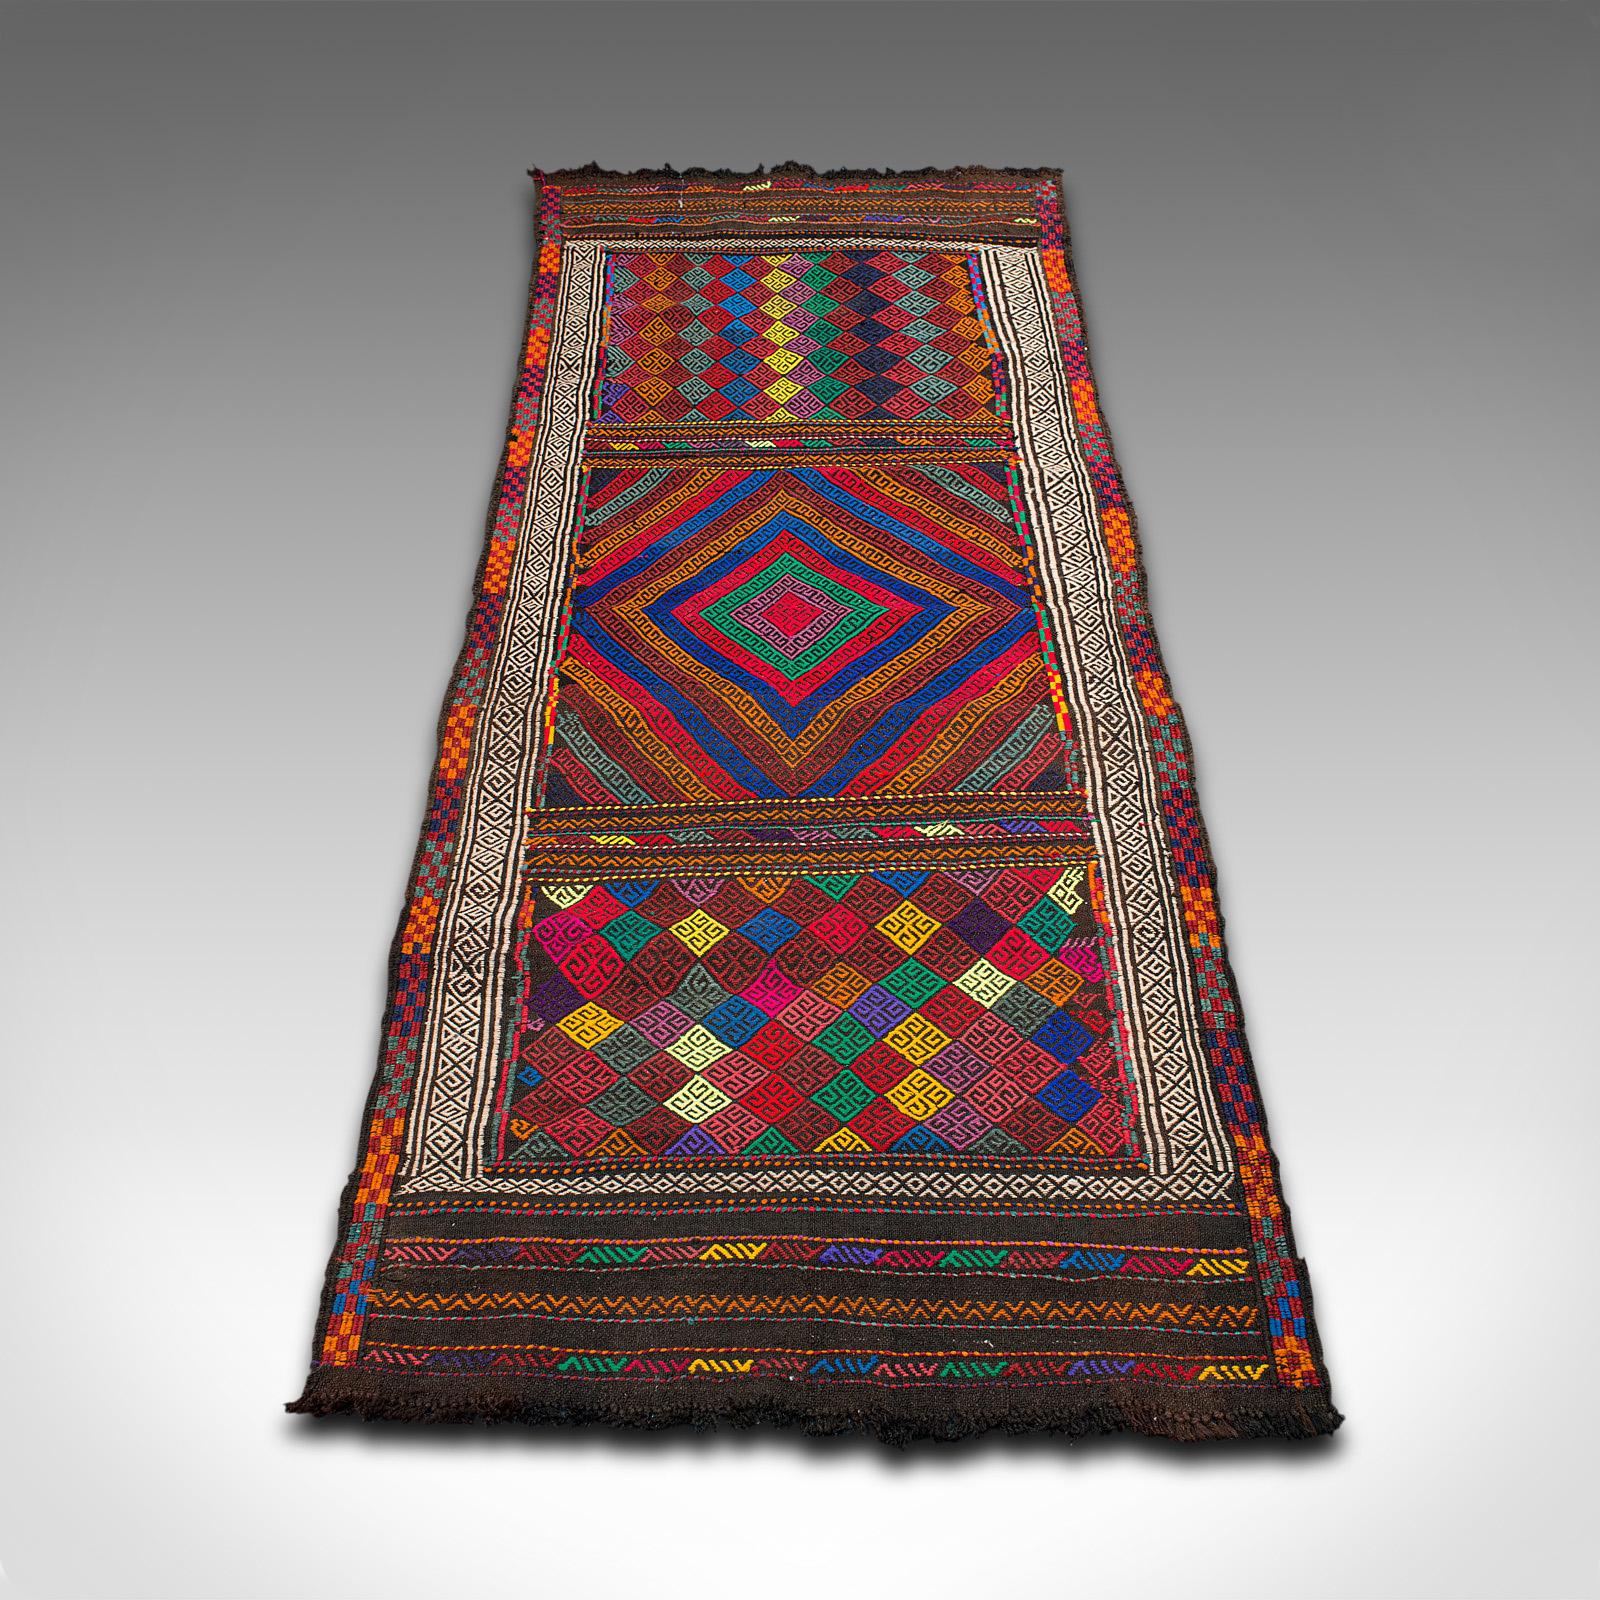 This is a colourful vintage Suzani Kilim runner. A Middle Eastern, woven hallway or entrance hall carpet, dating to the late 20th century, circa 1980.

Of useful entrance hall or bay window size at 79cm x 211cm (31